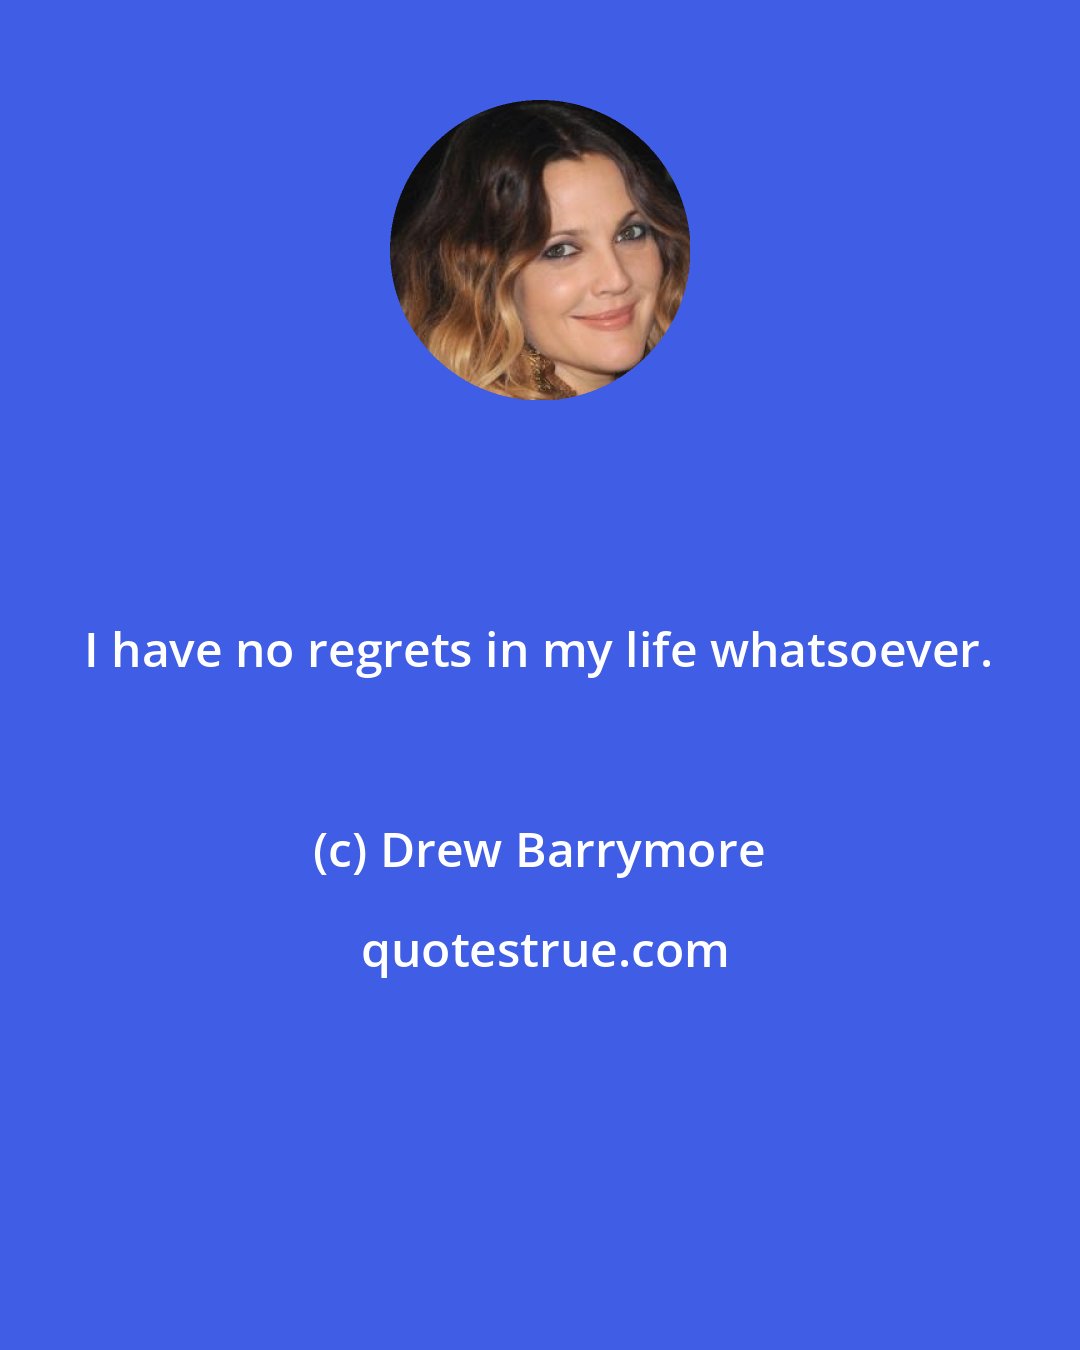 Drew Barrymore: I have no regrets in my life whatsoever.